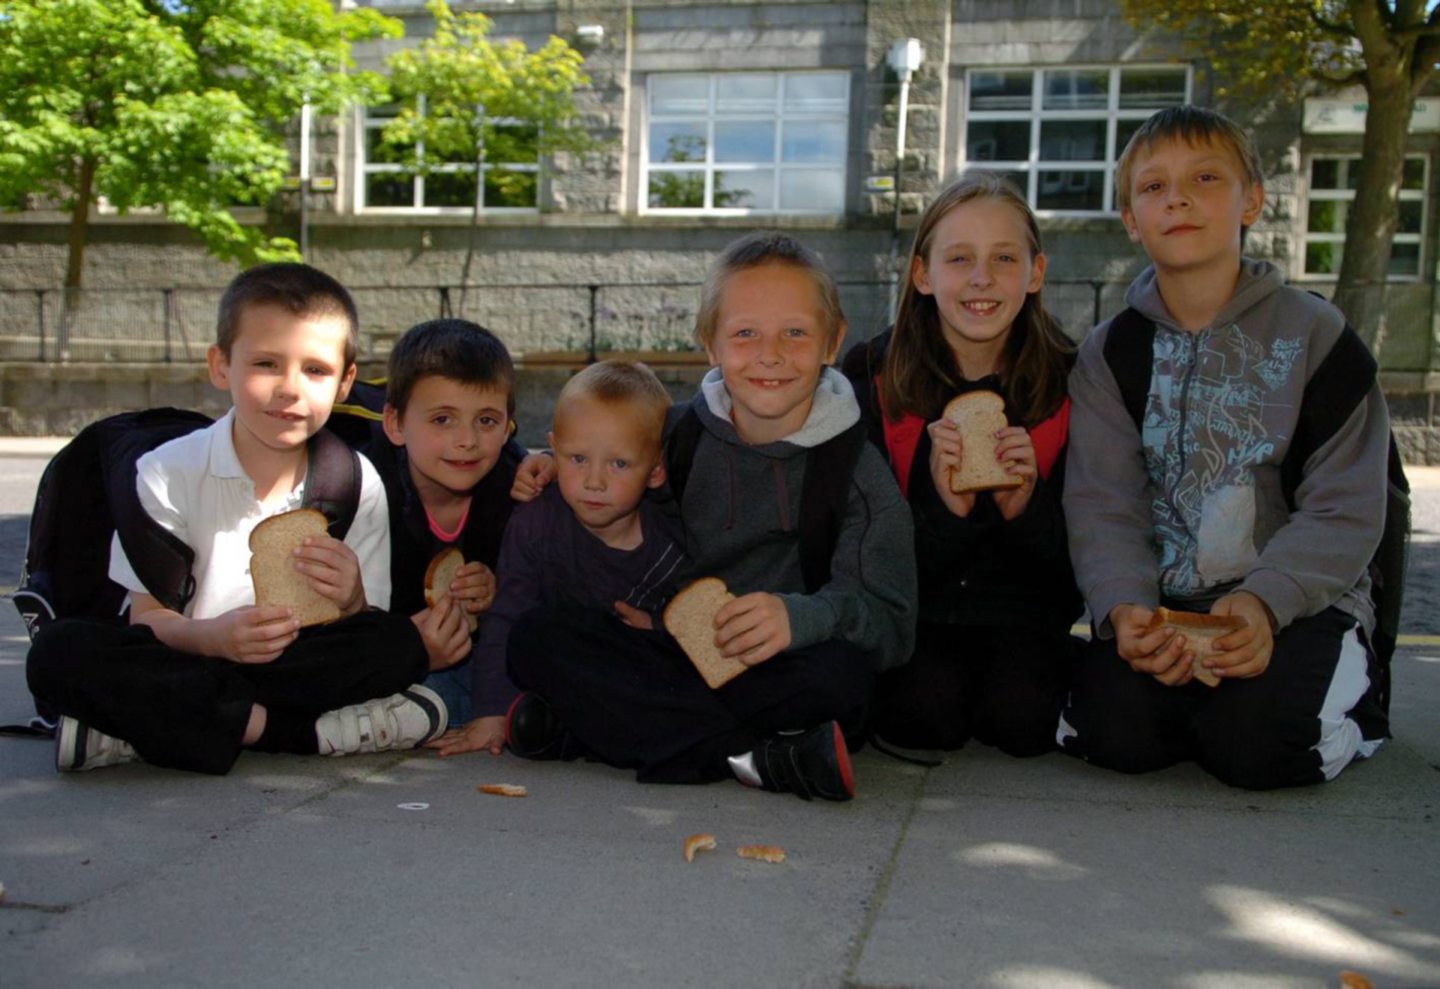 Pupils smile for a photo during breaktime in 2010.